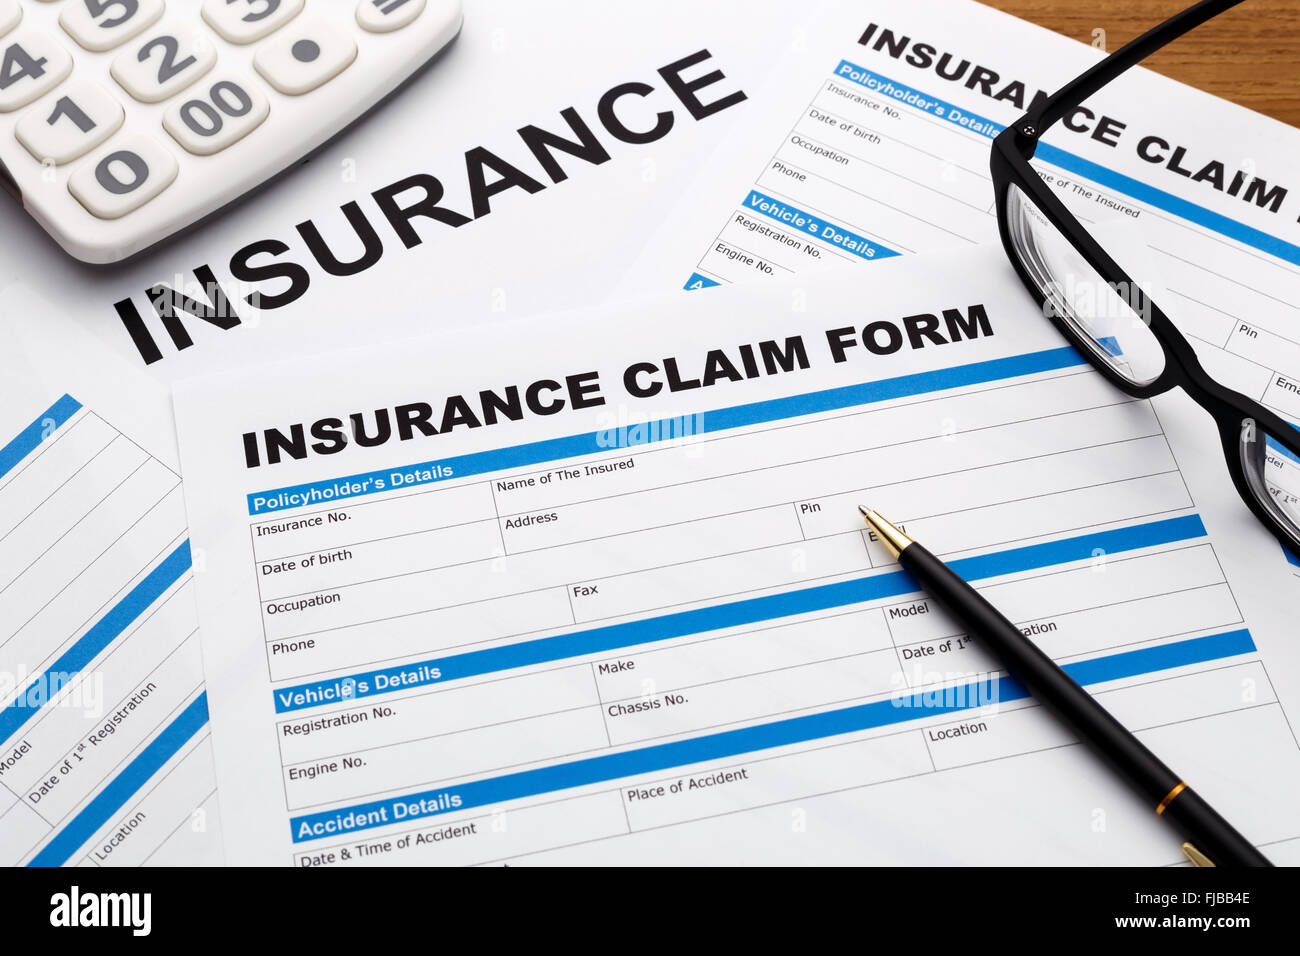 Insurance claim form with pen and calculator Stock Photo